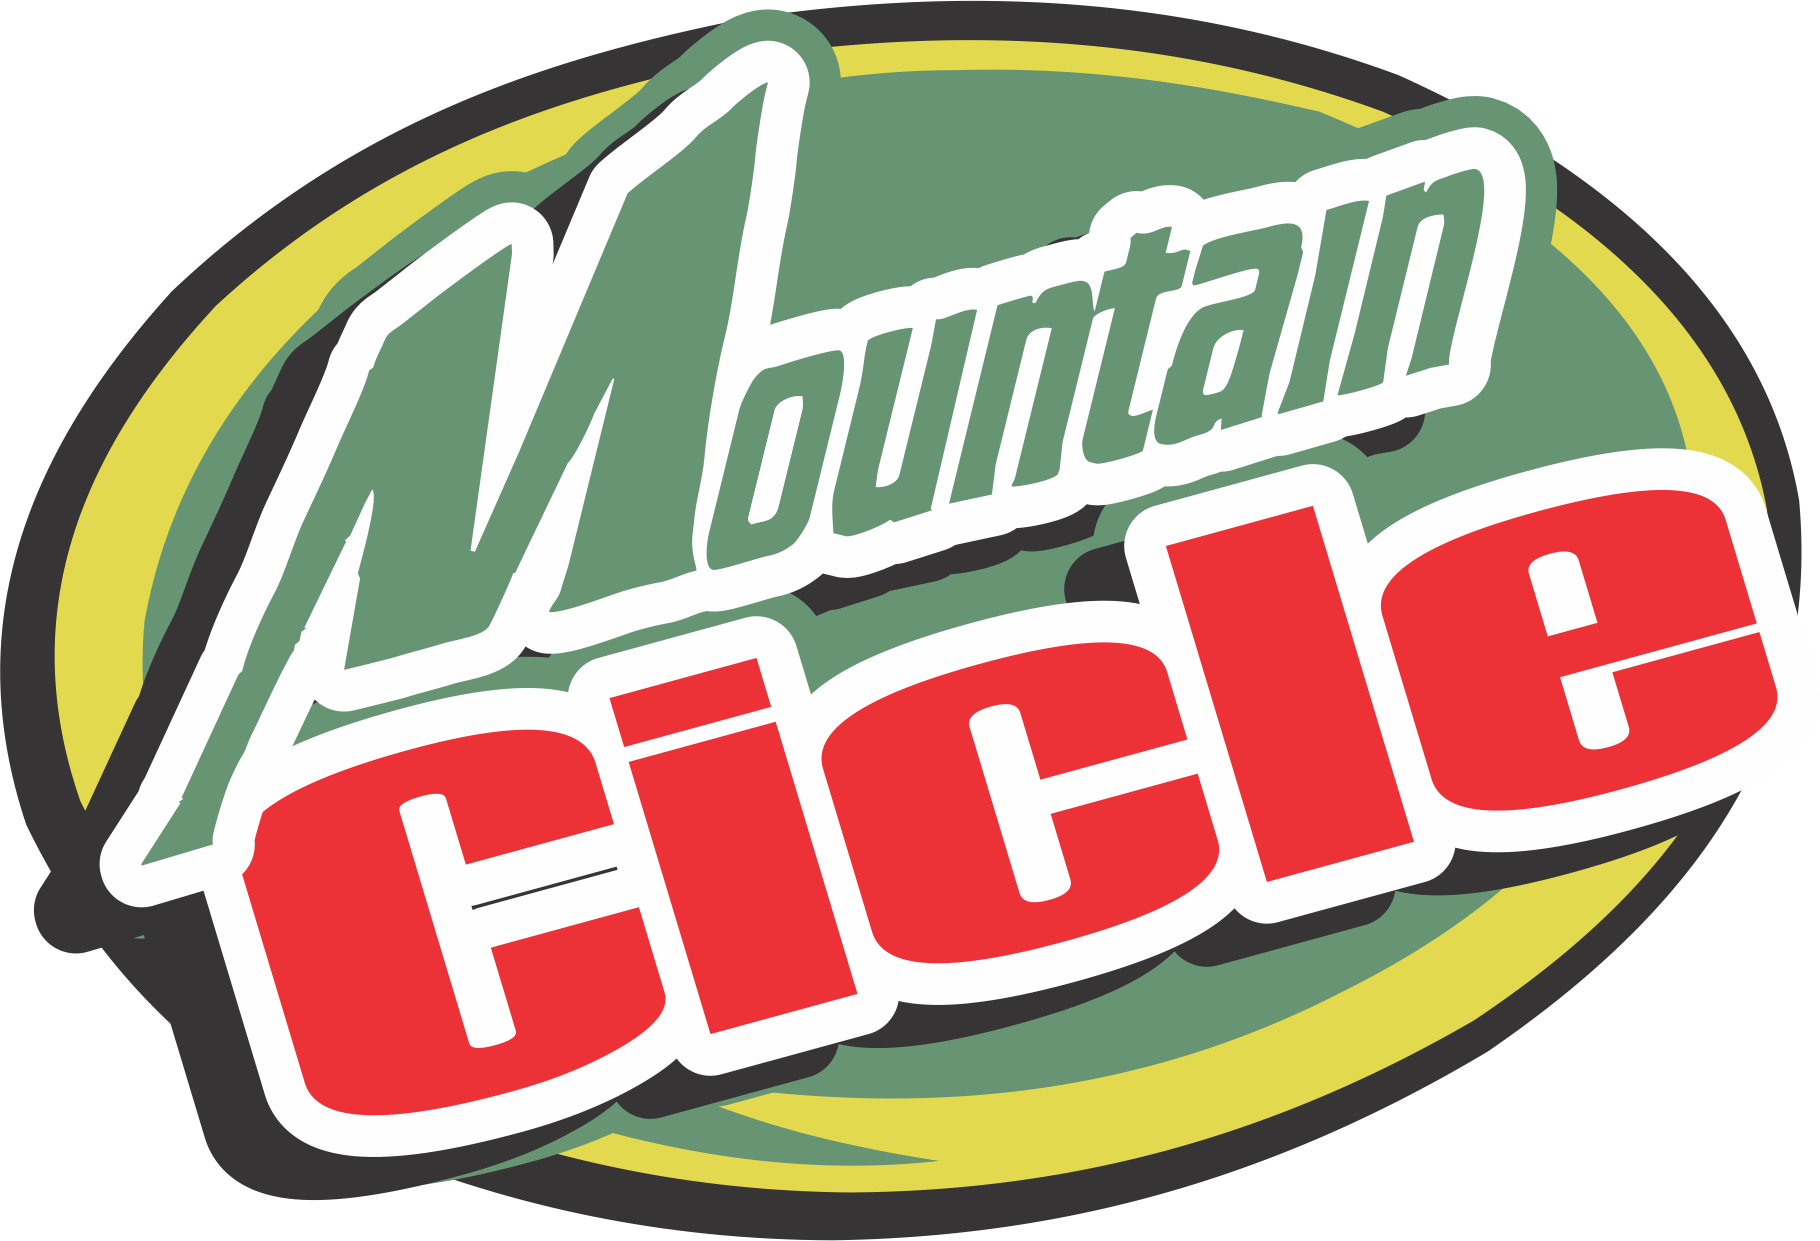 MOUNTAIN CICLE